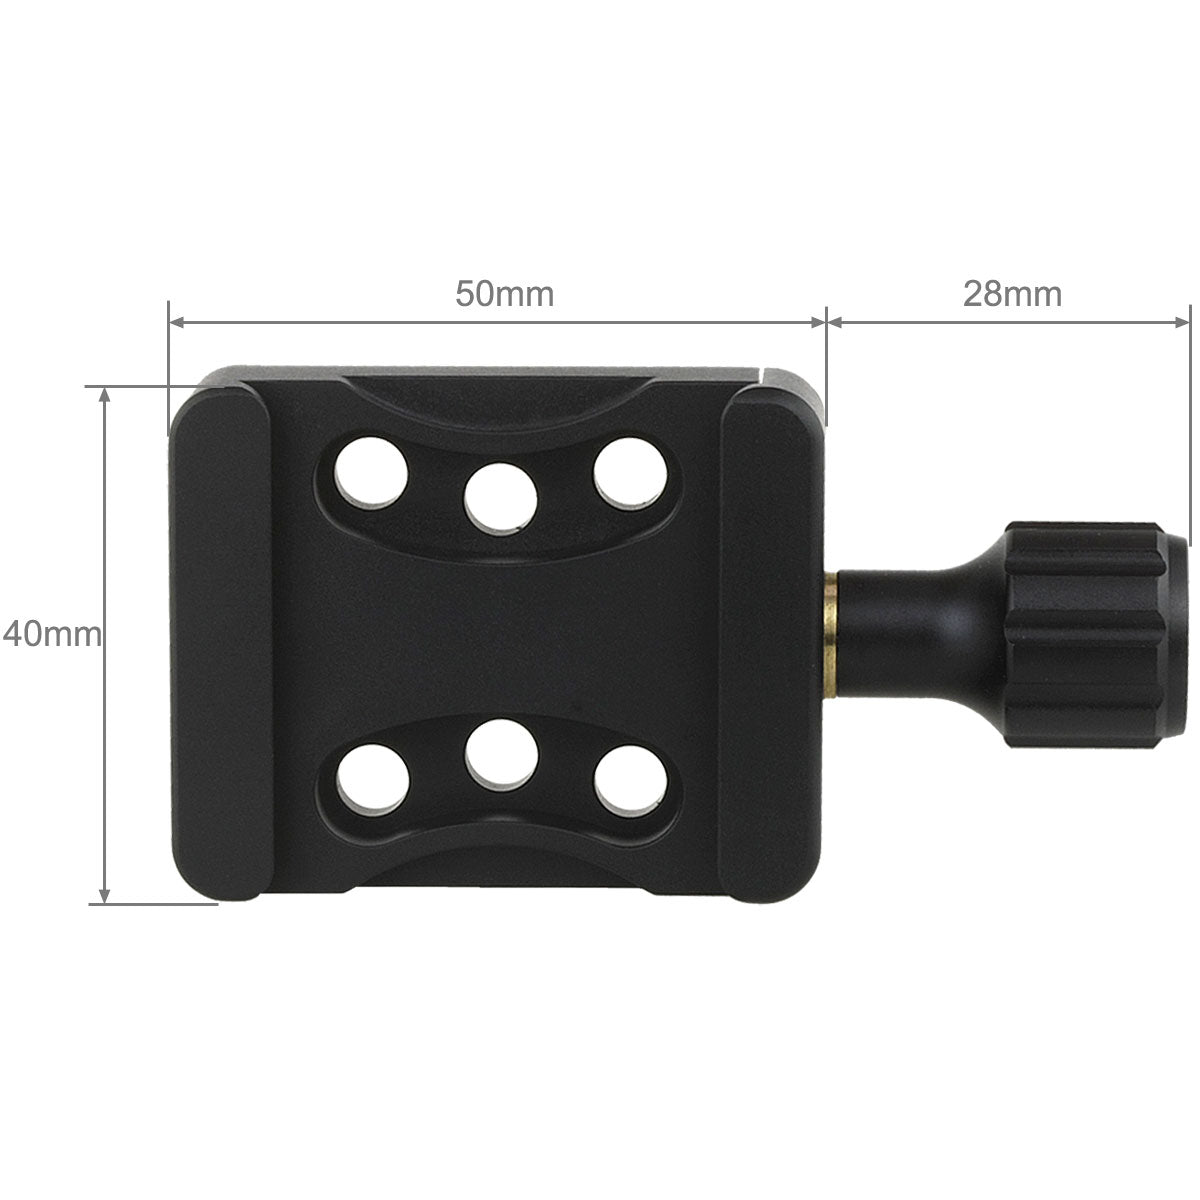 Haoge CP-20 Screw Knob Clamp Adapter Mount with Three Pairs of 20mm Holes for DIY Support System with Haoge Plates